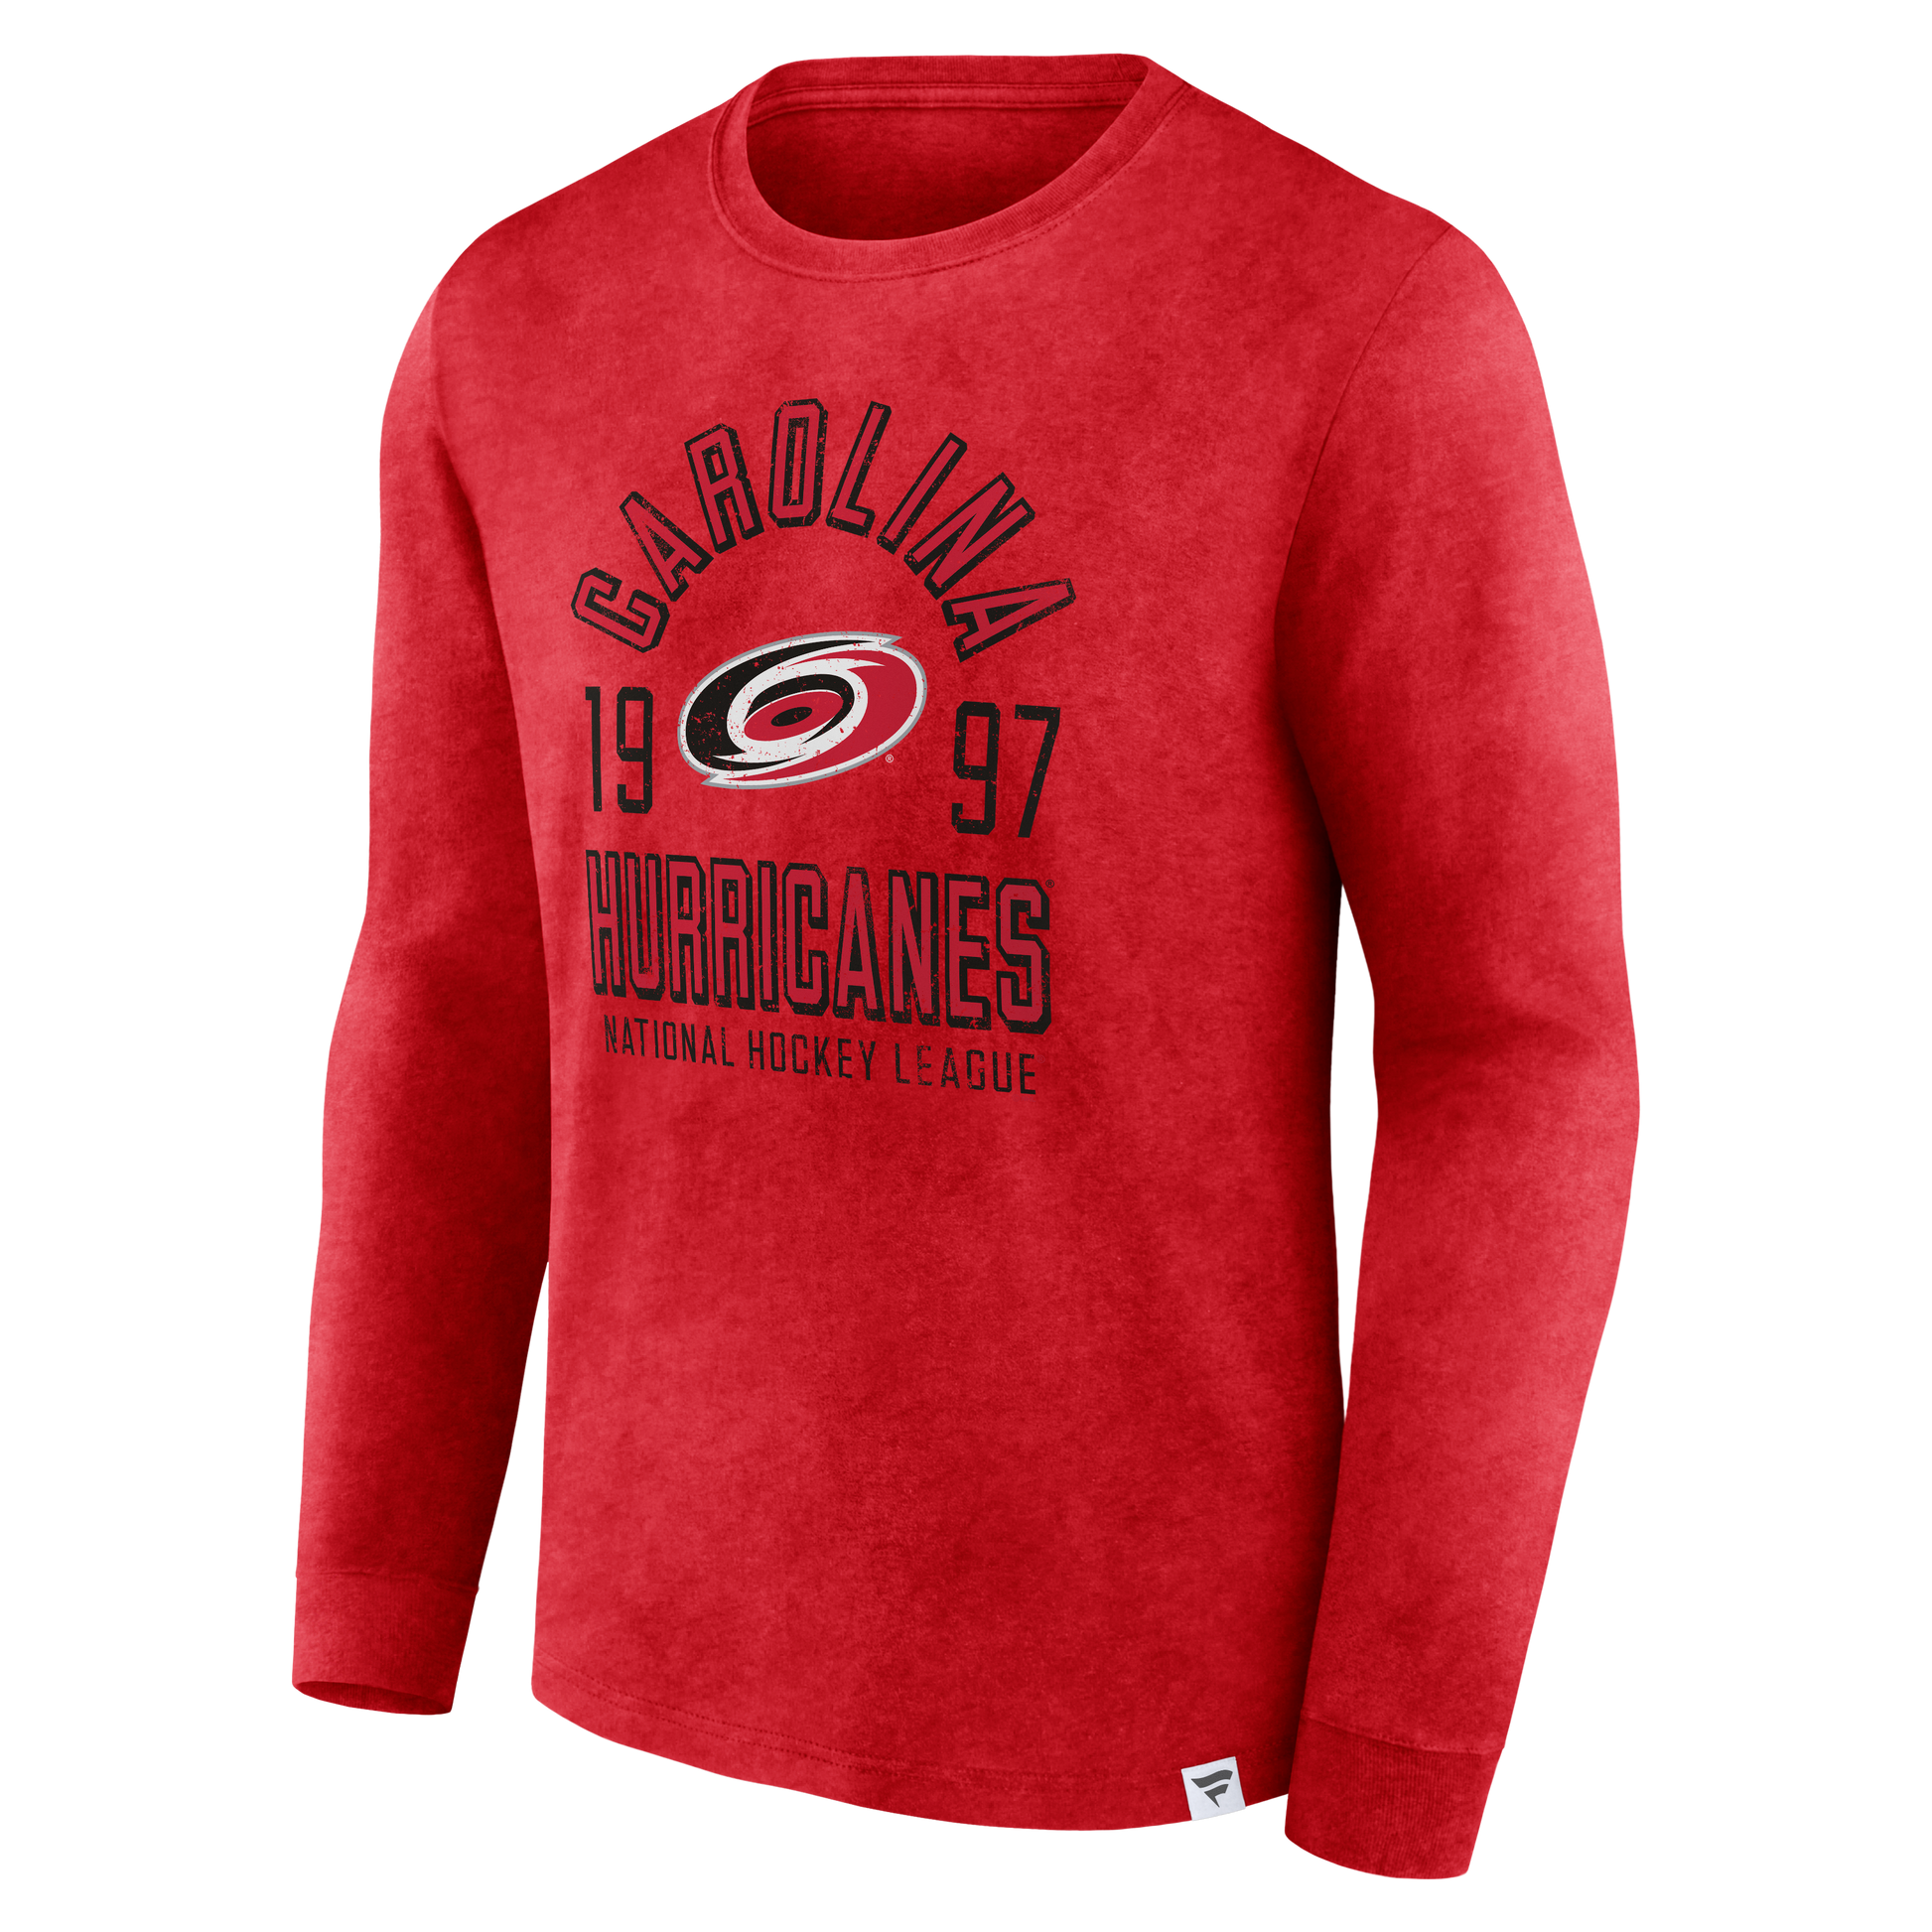 Front: Red long sleeve that says Carolina Hurricanes 1997 National Hockey League with Hurricanes logo in center